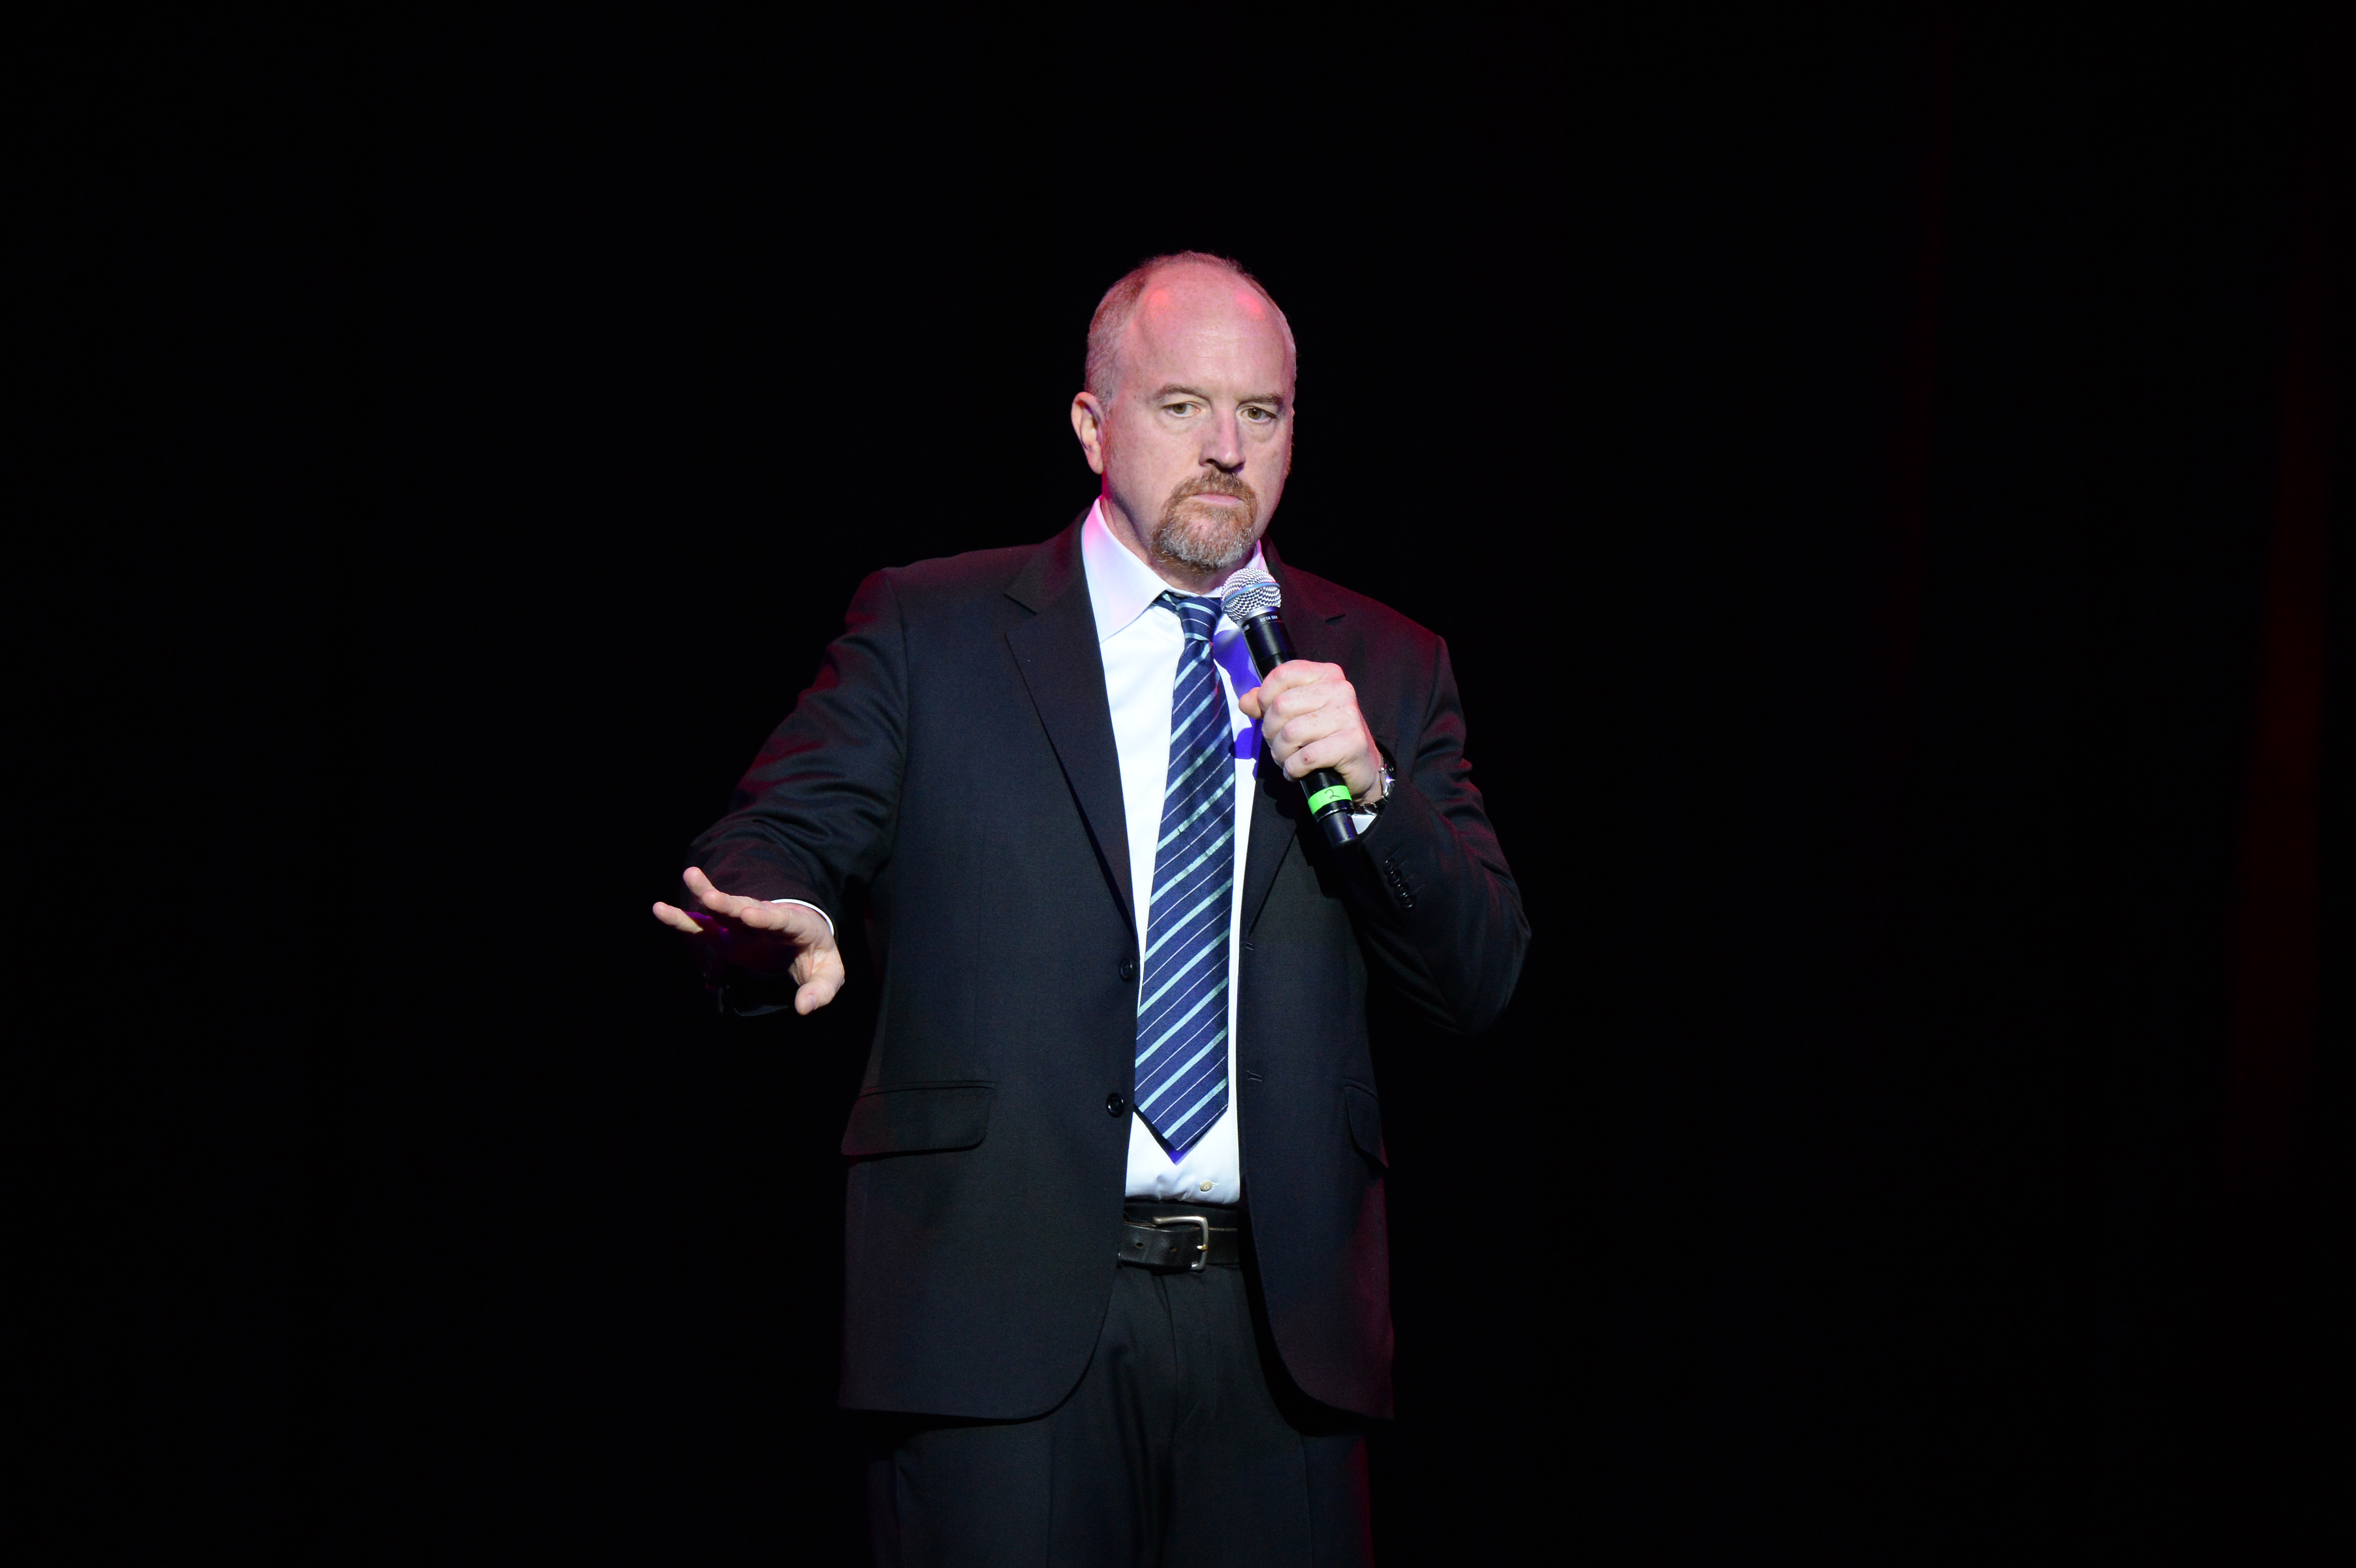 Louis C.K. performs on stage as The New York Comedy Festival and The Bob Woodruff Foundation present the 10th Annual Stand Up for Heroes event at The Theater at Madison Square Garden on November 1, 2016 in New York City. (Photo by Kevin Mazur/Getty Images for The Bob Woodruff Foundation)